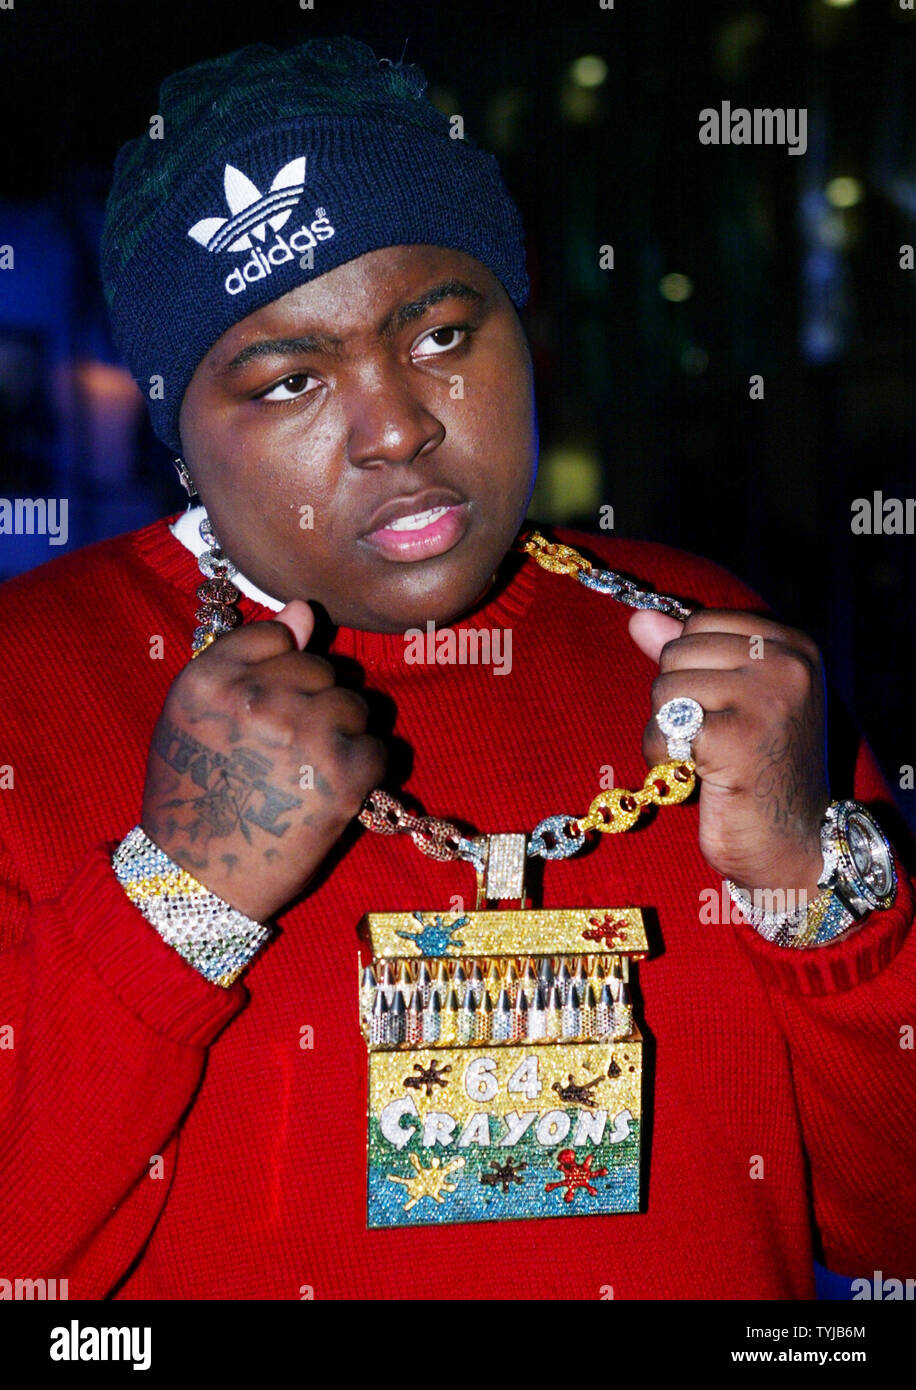 Singer Sean Kingston shows off his bling after performing at the 75th  Christmas tree lighting ceremony at Rockefeller Center on November 28, 2007  in New York City. The 84-foot high Norway spruce